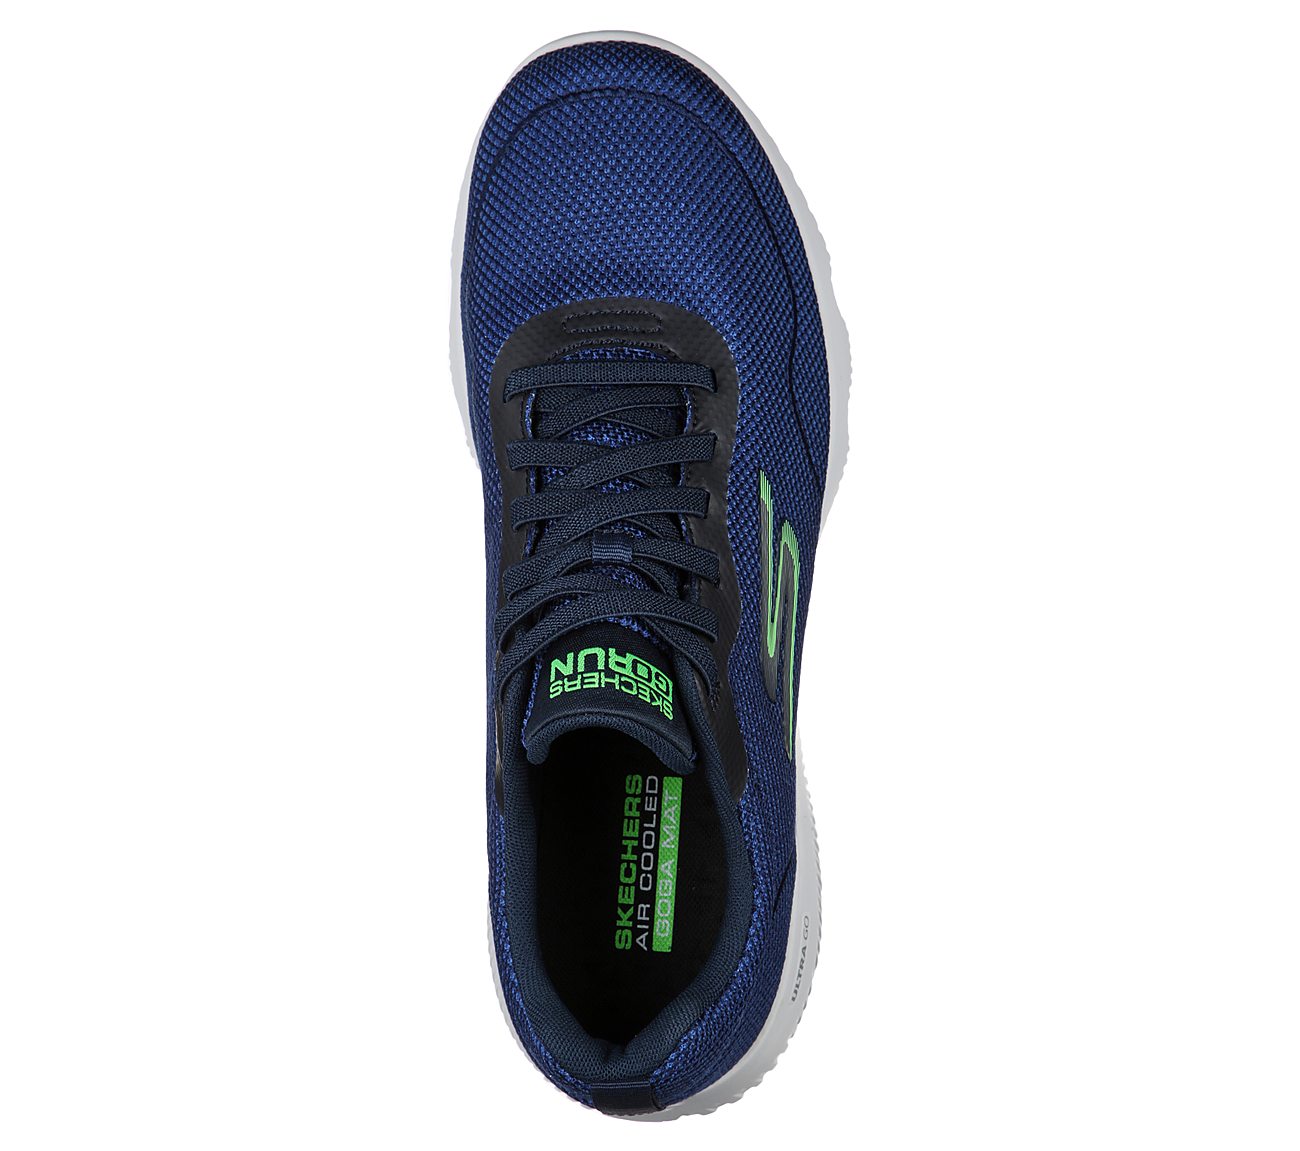 GO RUN FOCUS-FORGED, NAVY/GREEN Footwear Top View